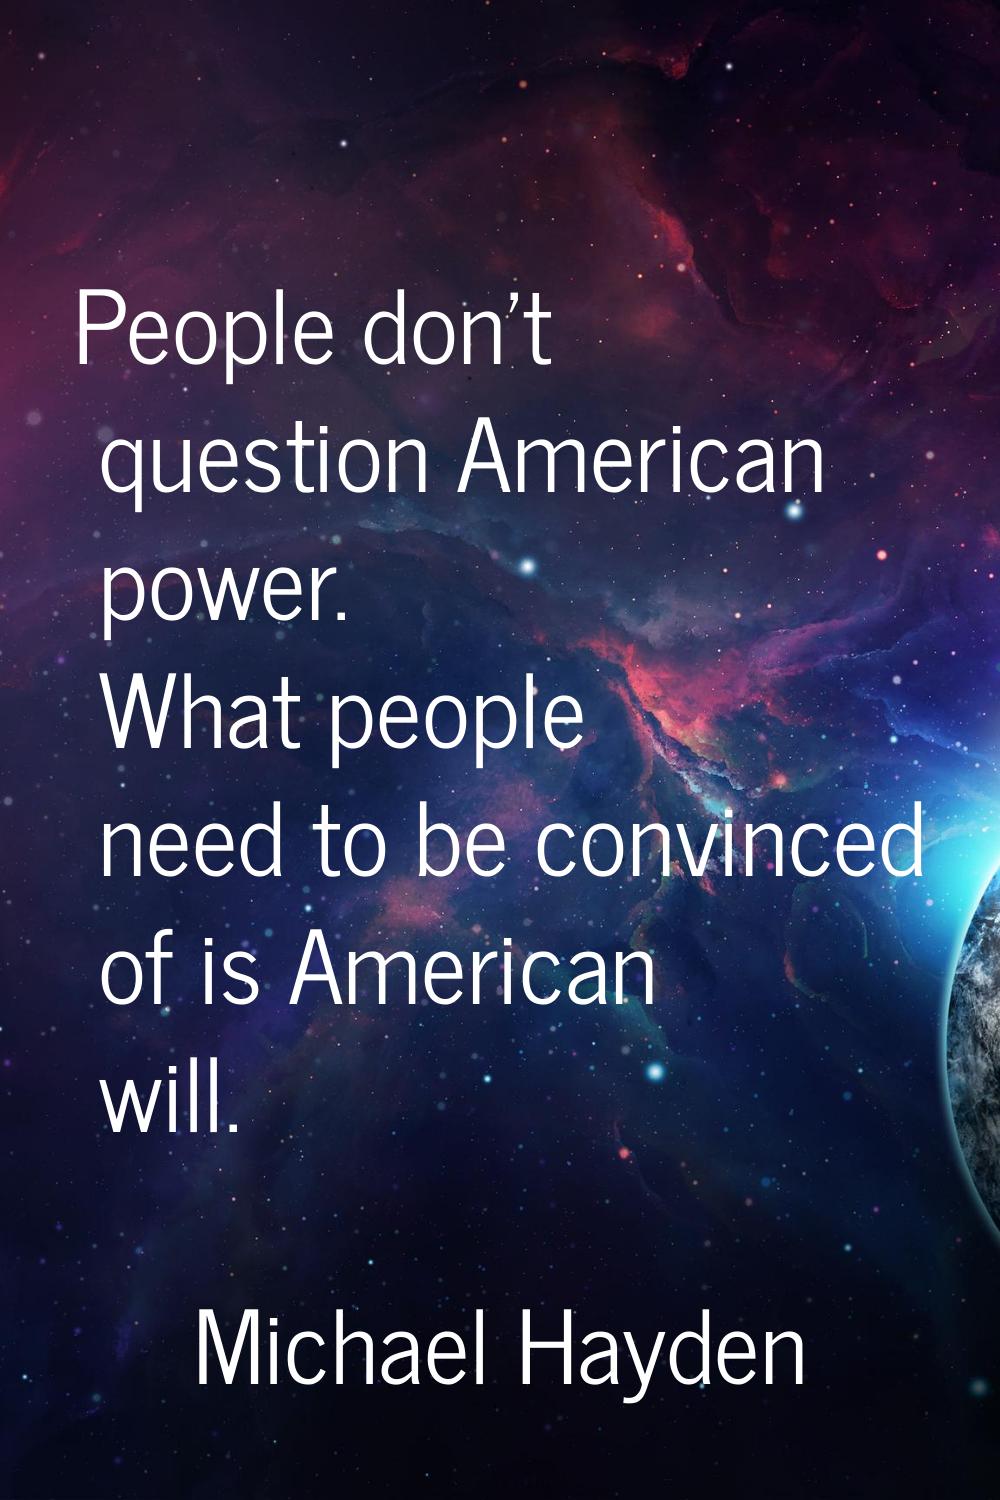 People don't question American power. What people need to be convinced of is American will.